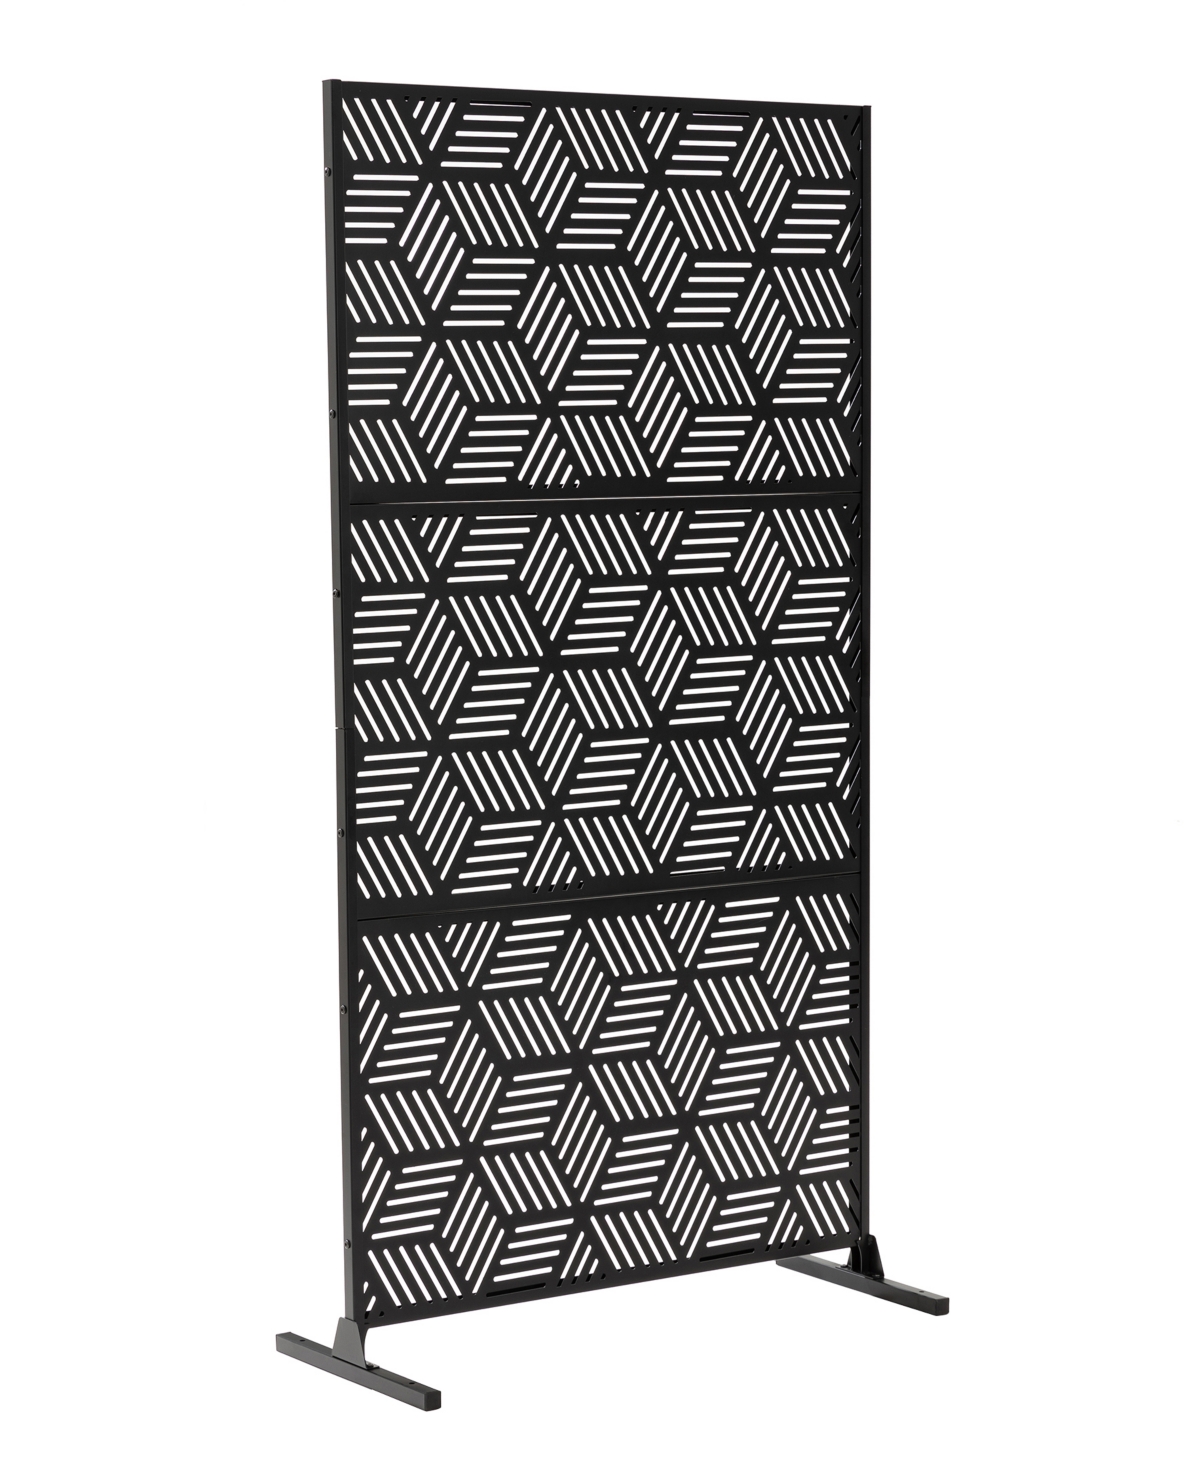 Black Geometric Pattern Privacy Panel Room Divider with Riser Feet - Black